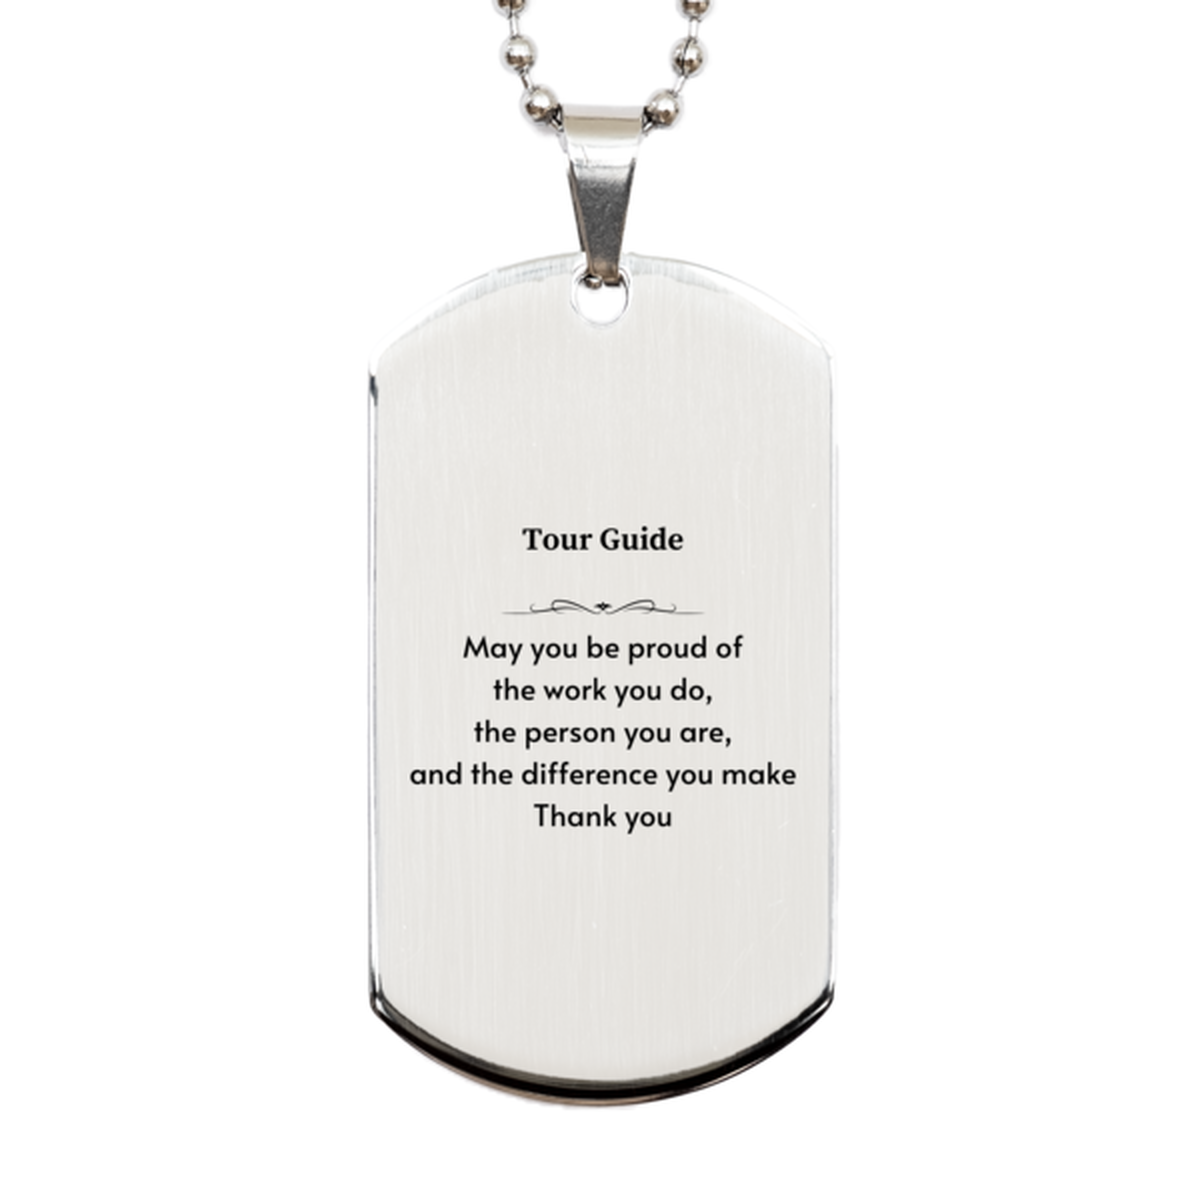 Heartwarming Silver Dog Tag Retirement Coworkers Gifts for Tour Guide, Tour Guide May You be proud of the work you do, the person you are Gifts for Boss Men Women Friends